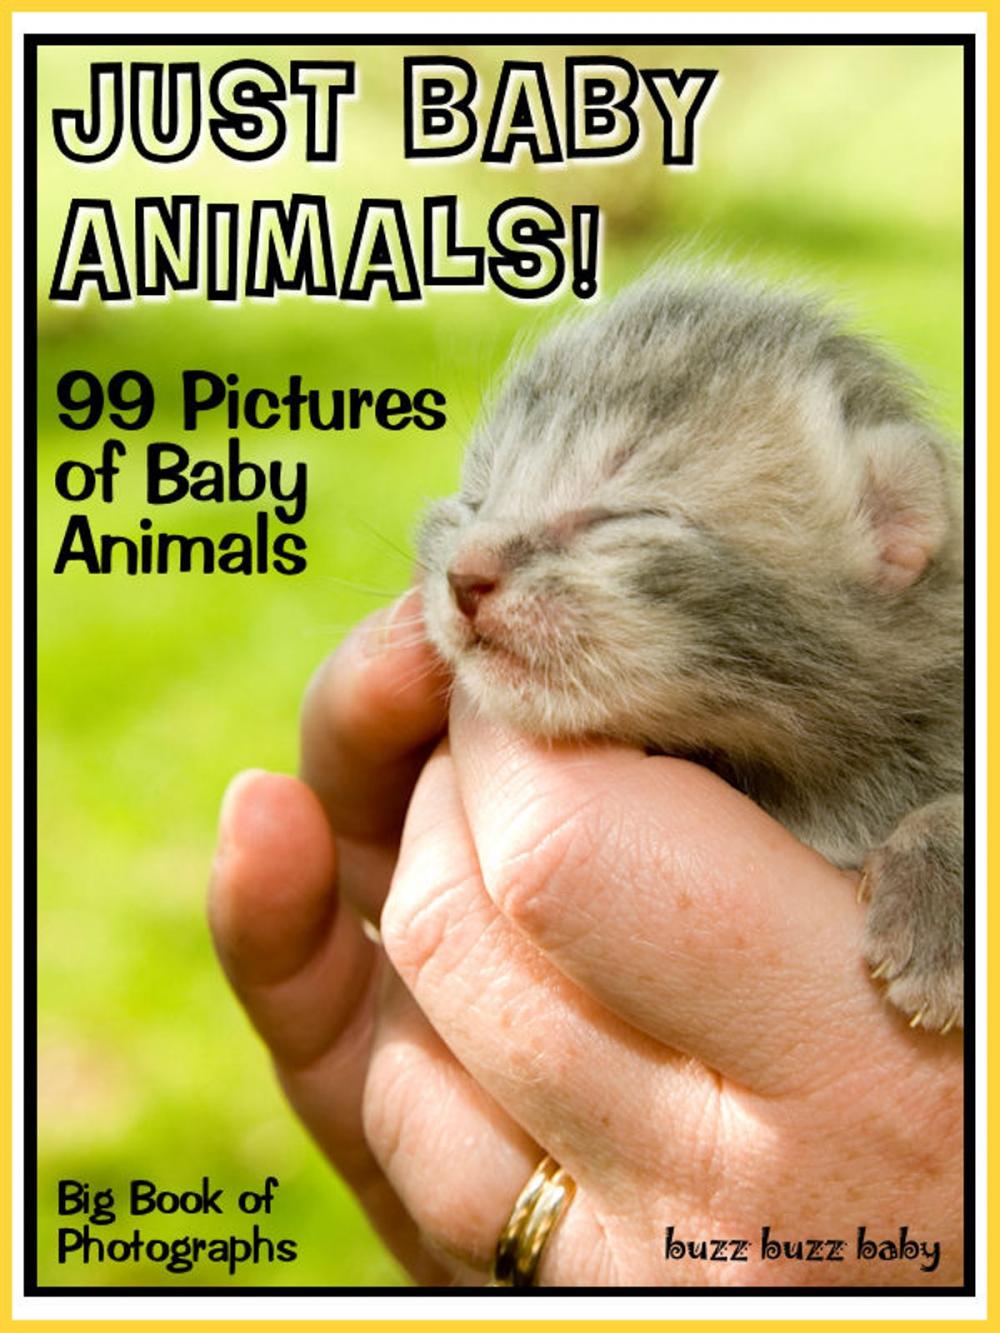 Big bigCover of 99 Pictures: Just Baby Animal Photos! Big Book of Baby Animal Photographs Vol. 1